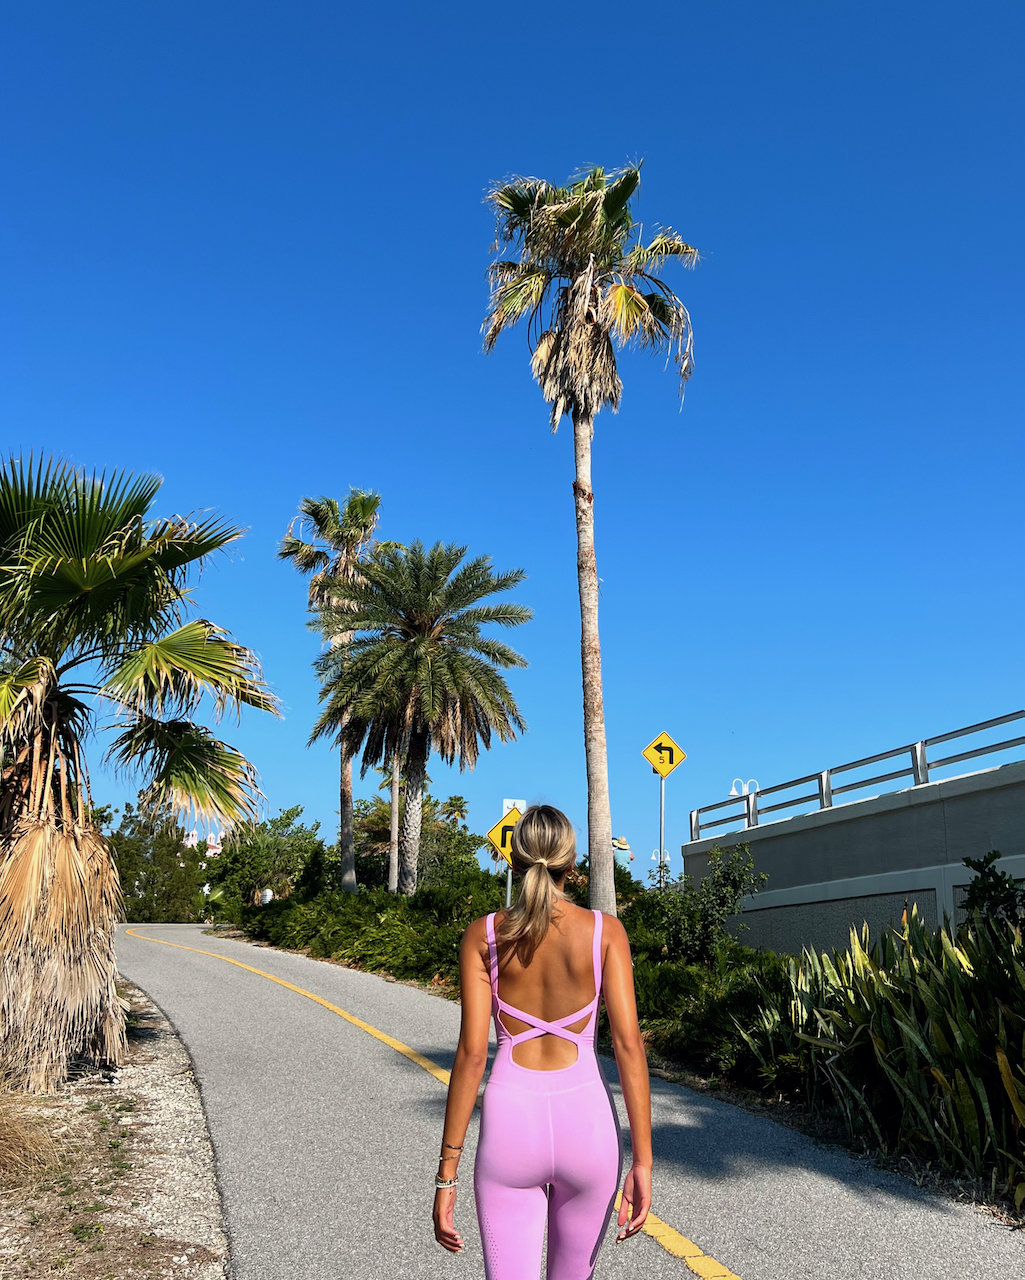 A Locals Travel Guide to Saint Petersburg, Florida